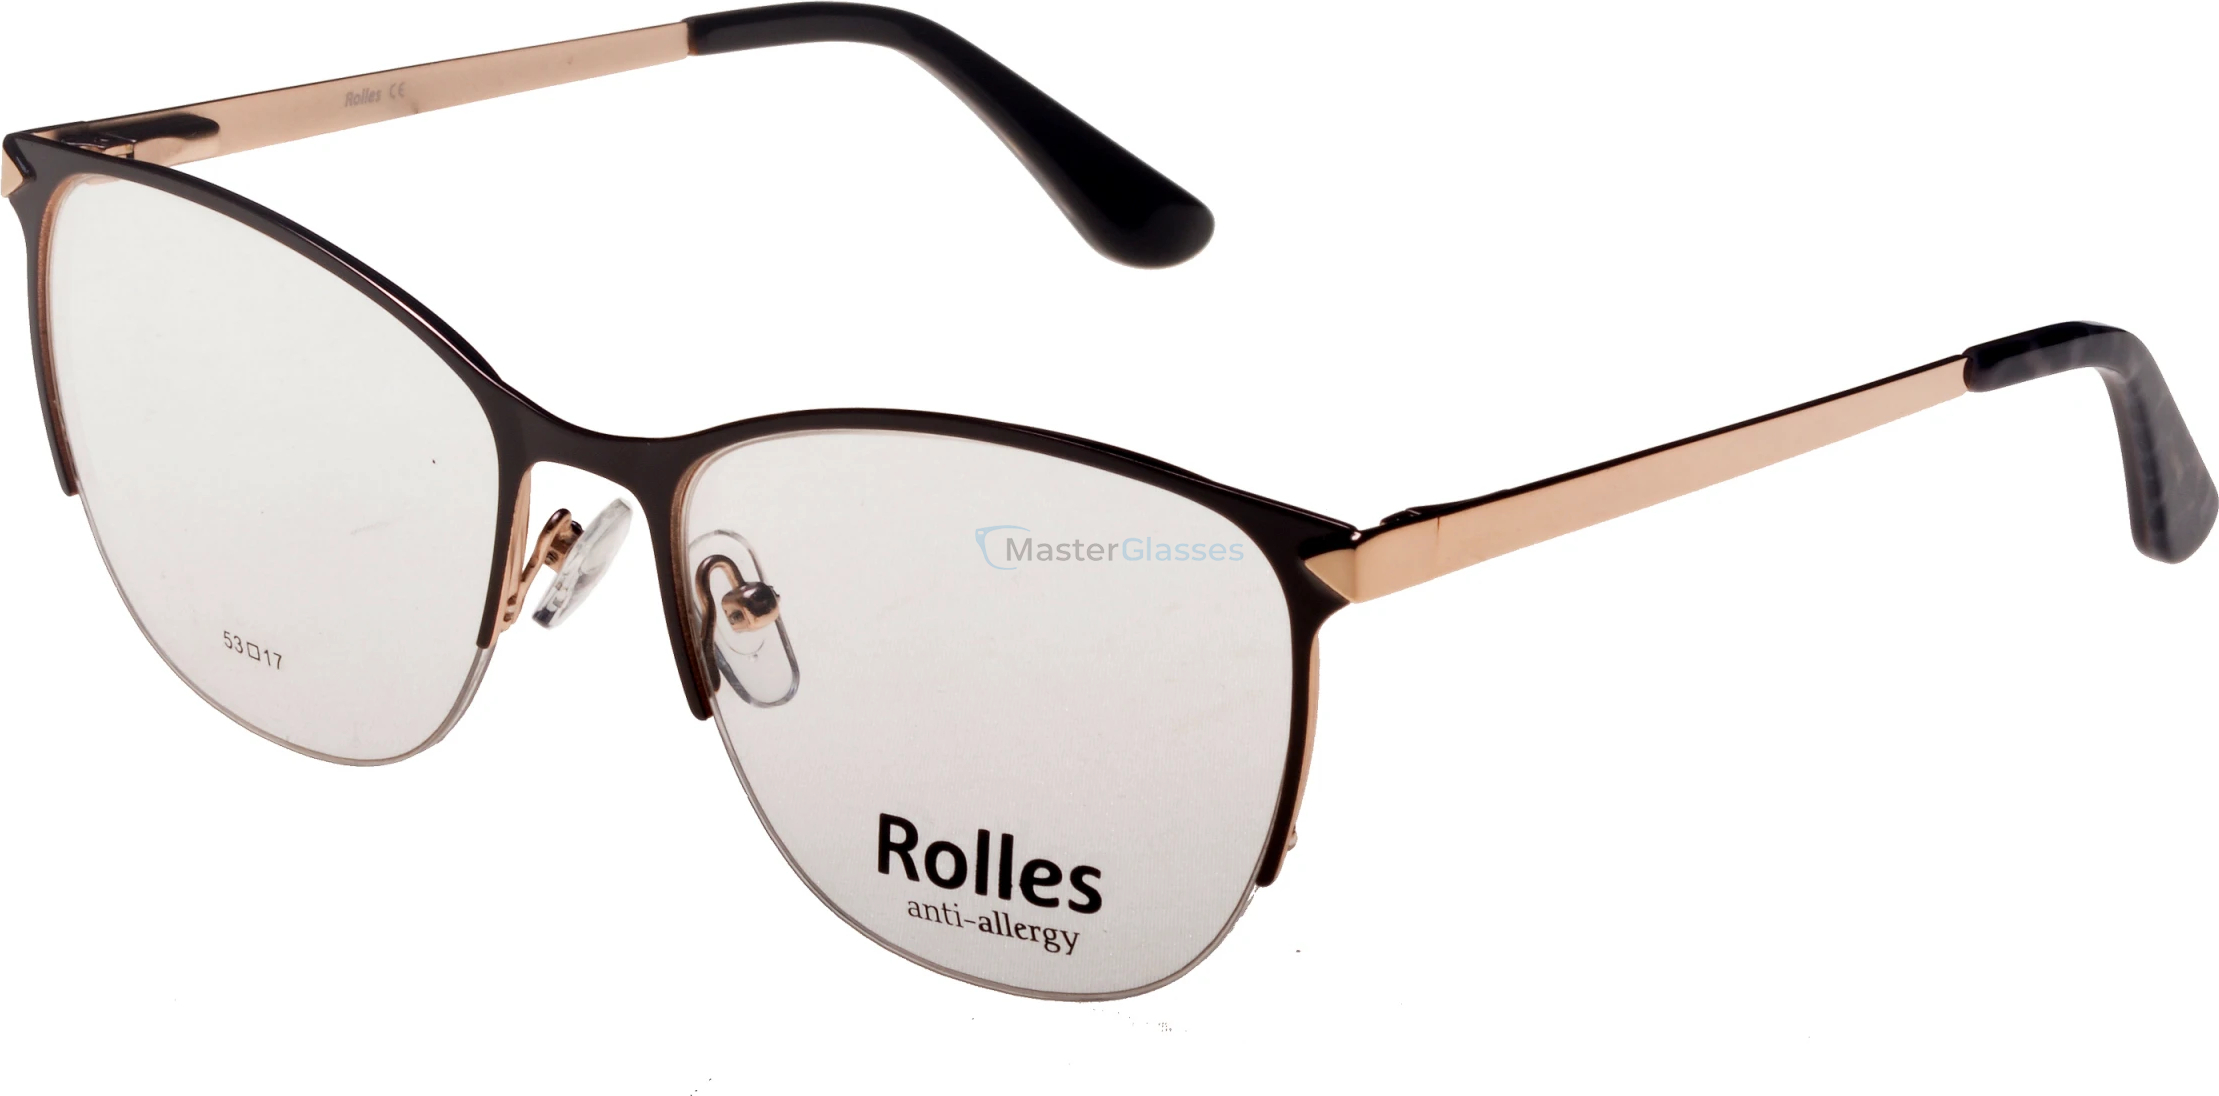  Rolles 700 02